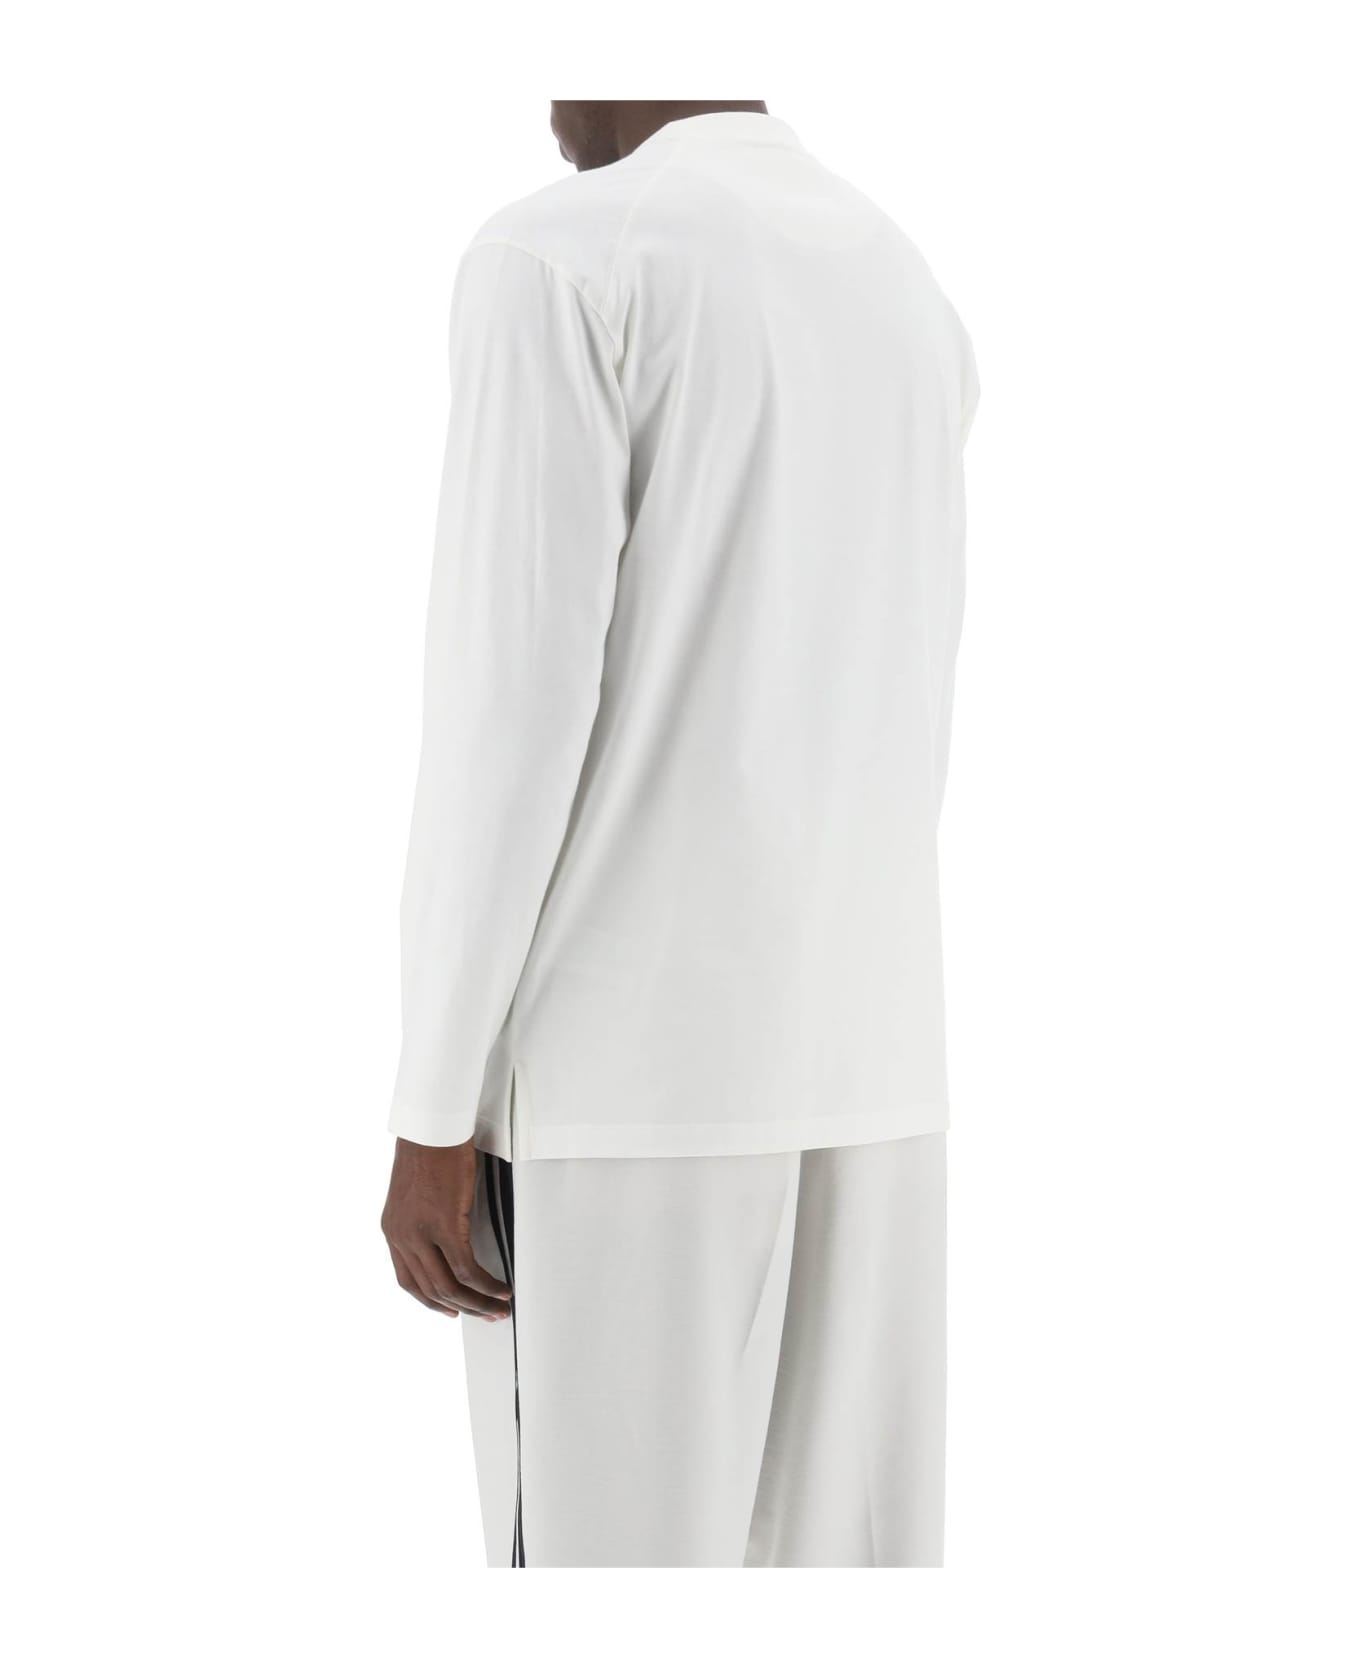 Y-3 Long-sleeved T-shirt With Logo Print - OWHITE (White)